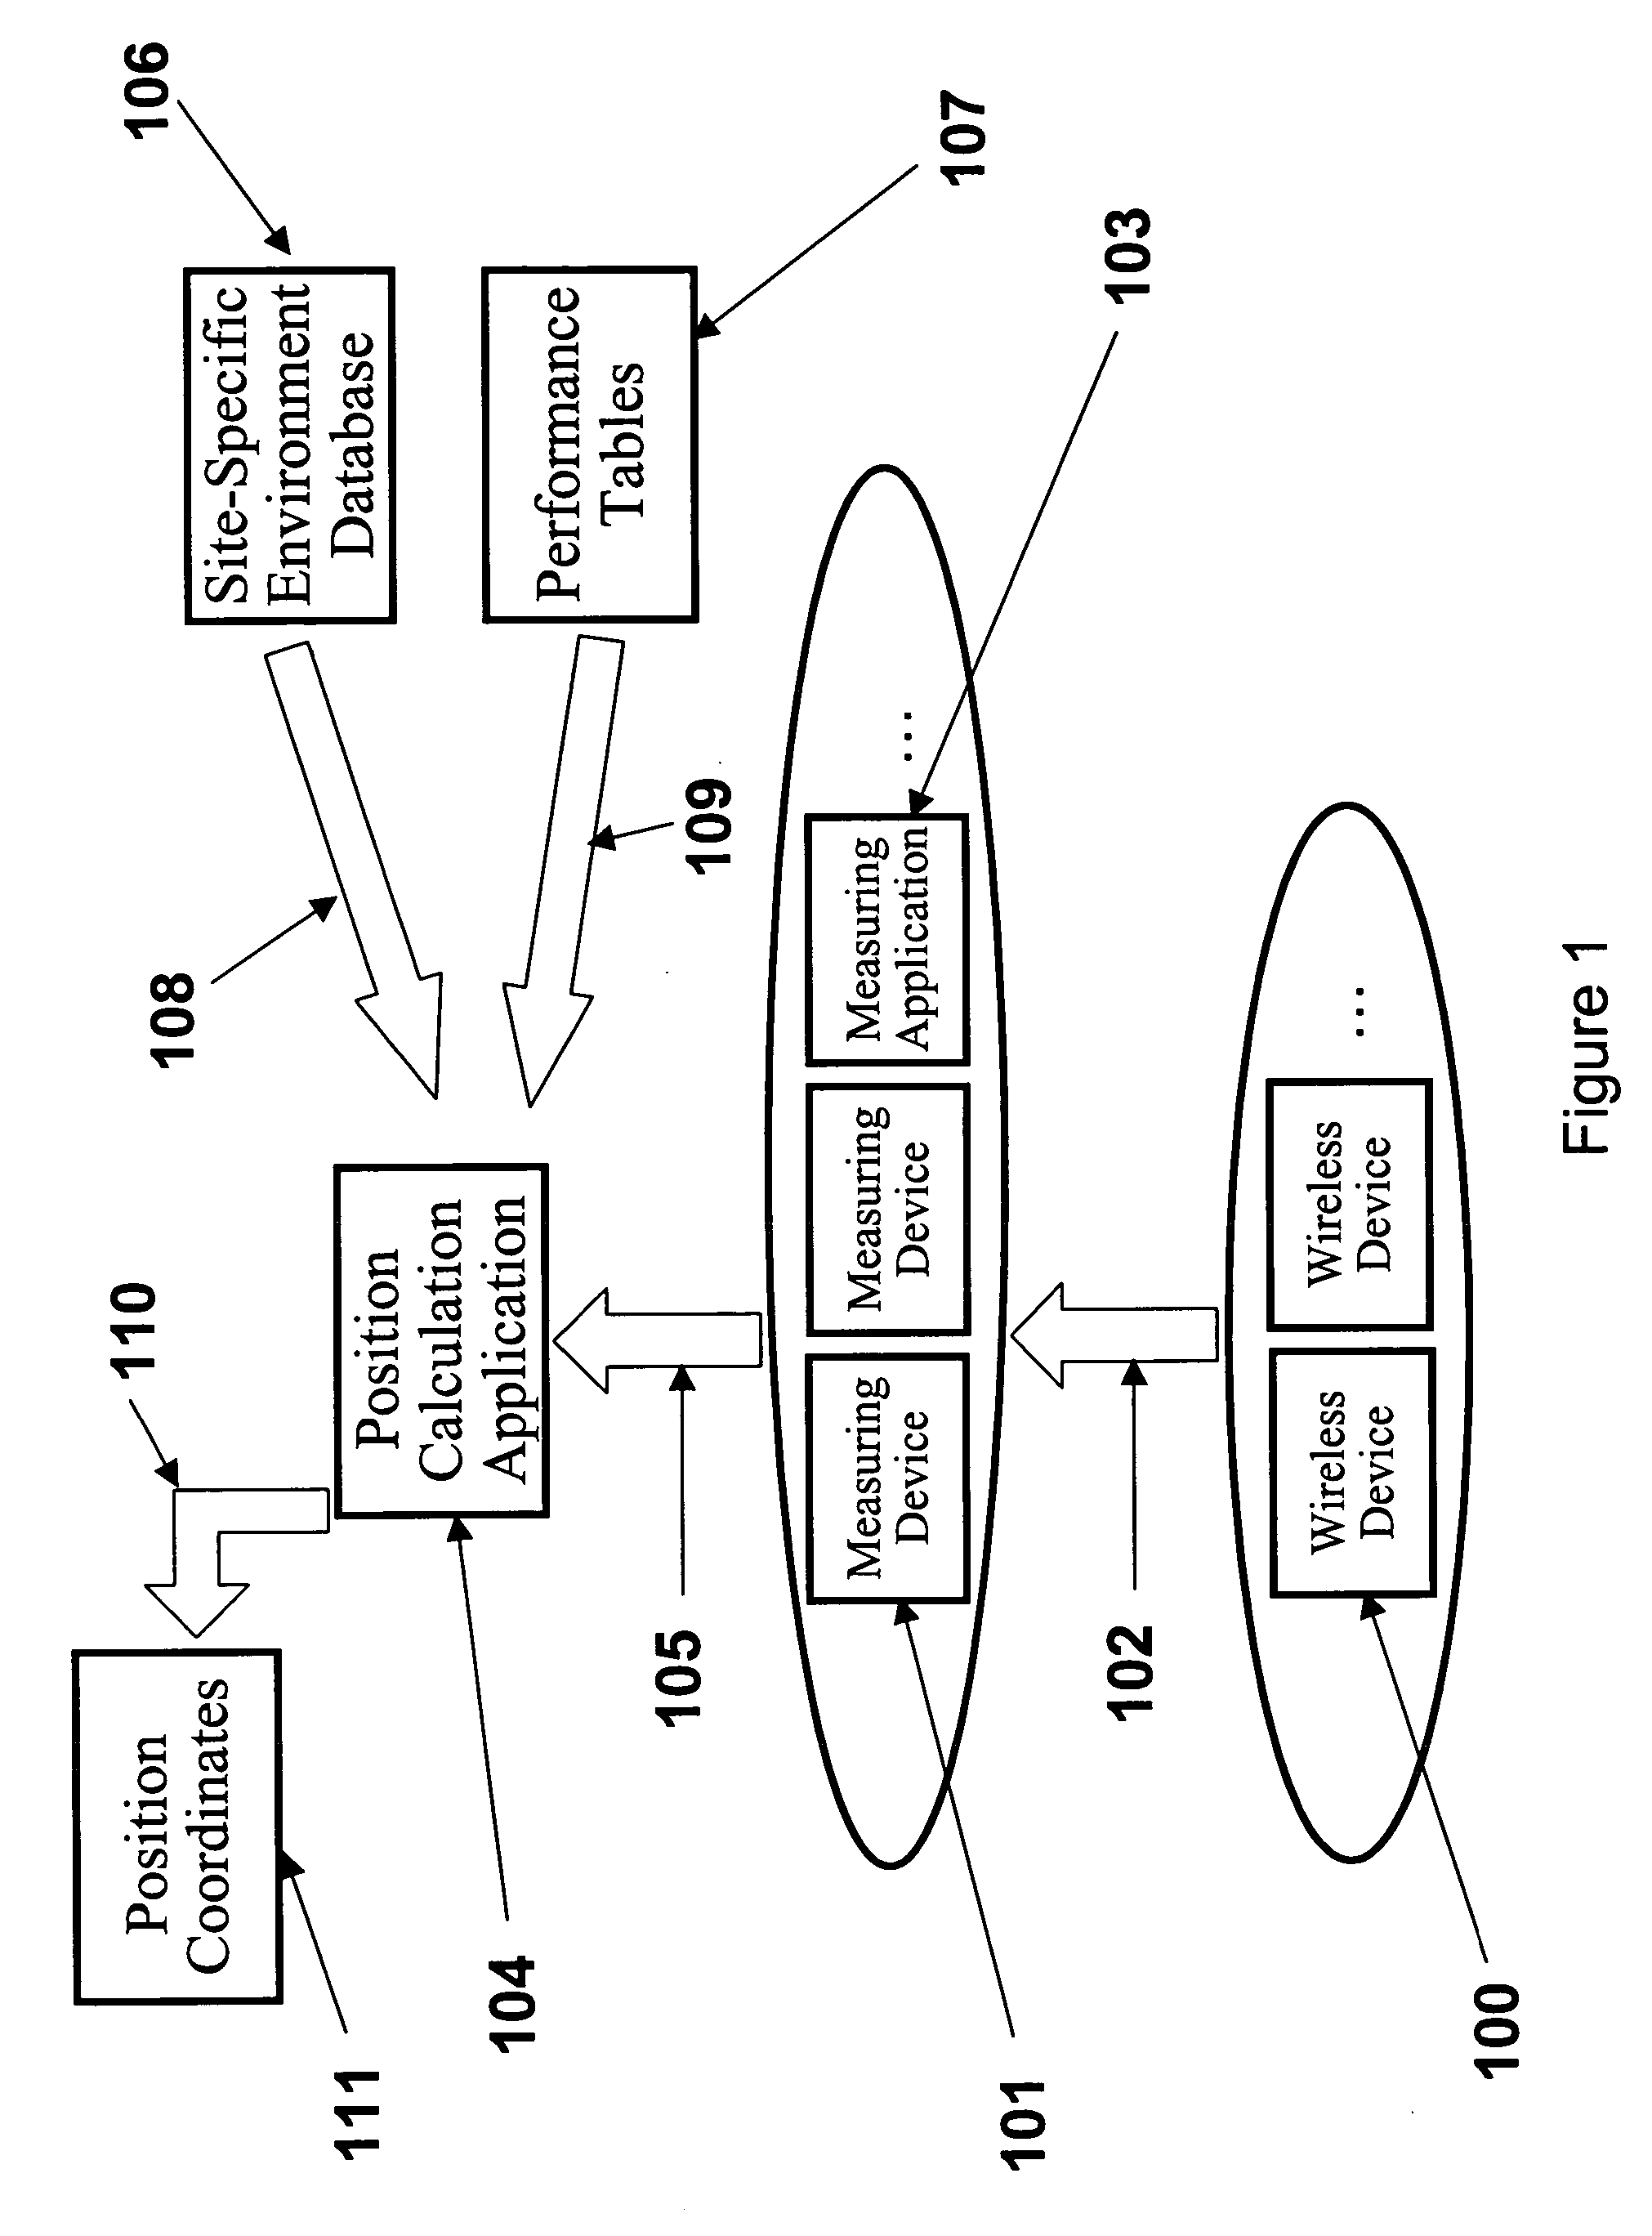 System, method, and apparatus for determining and using the position of wireless devices or infrastructure for wireless network enhancements